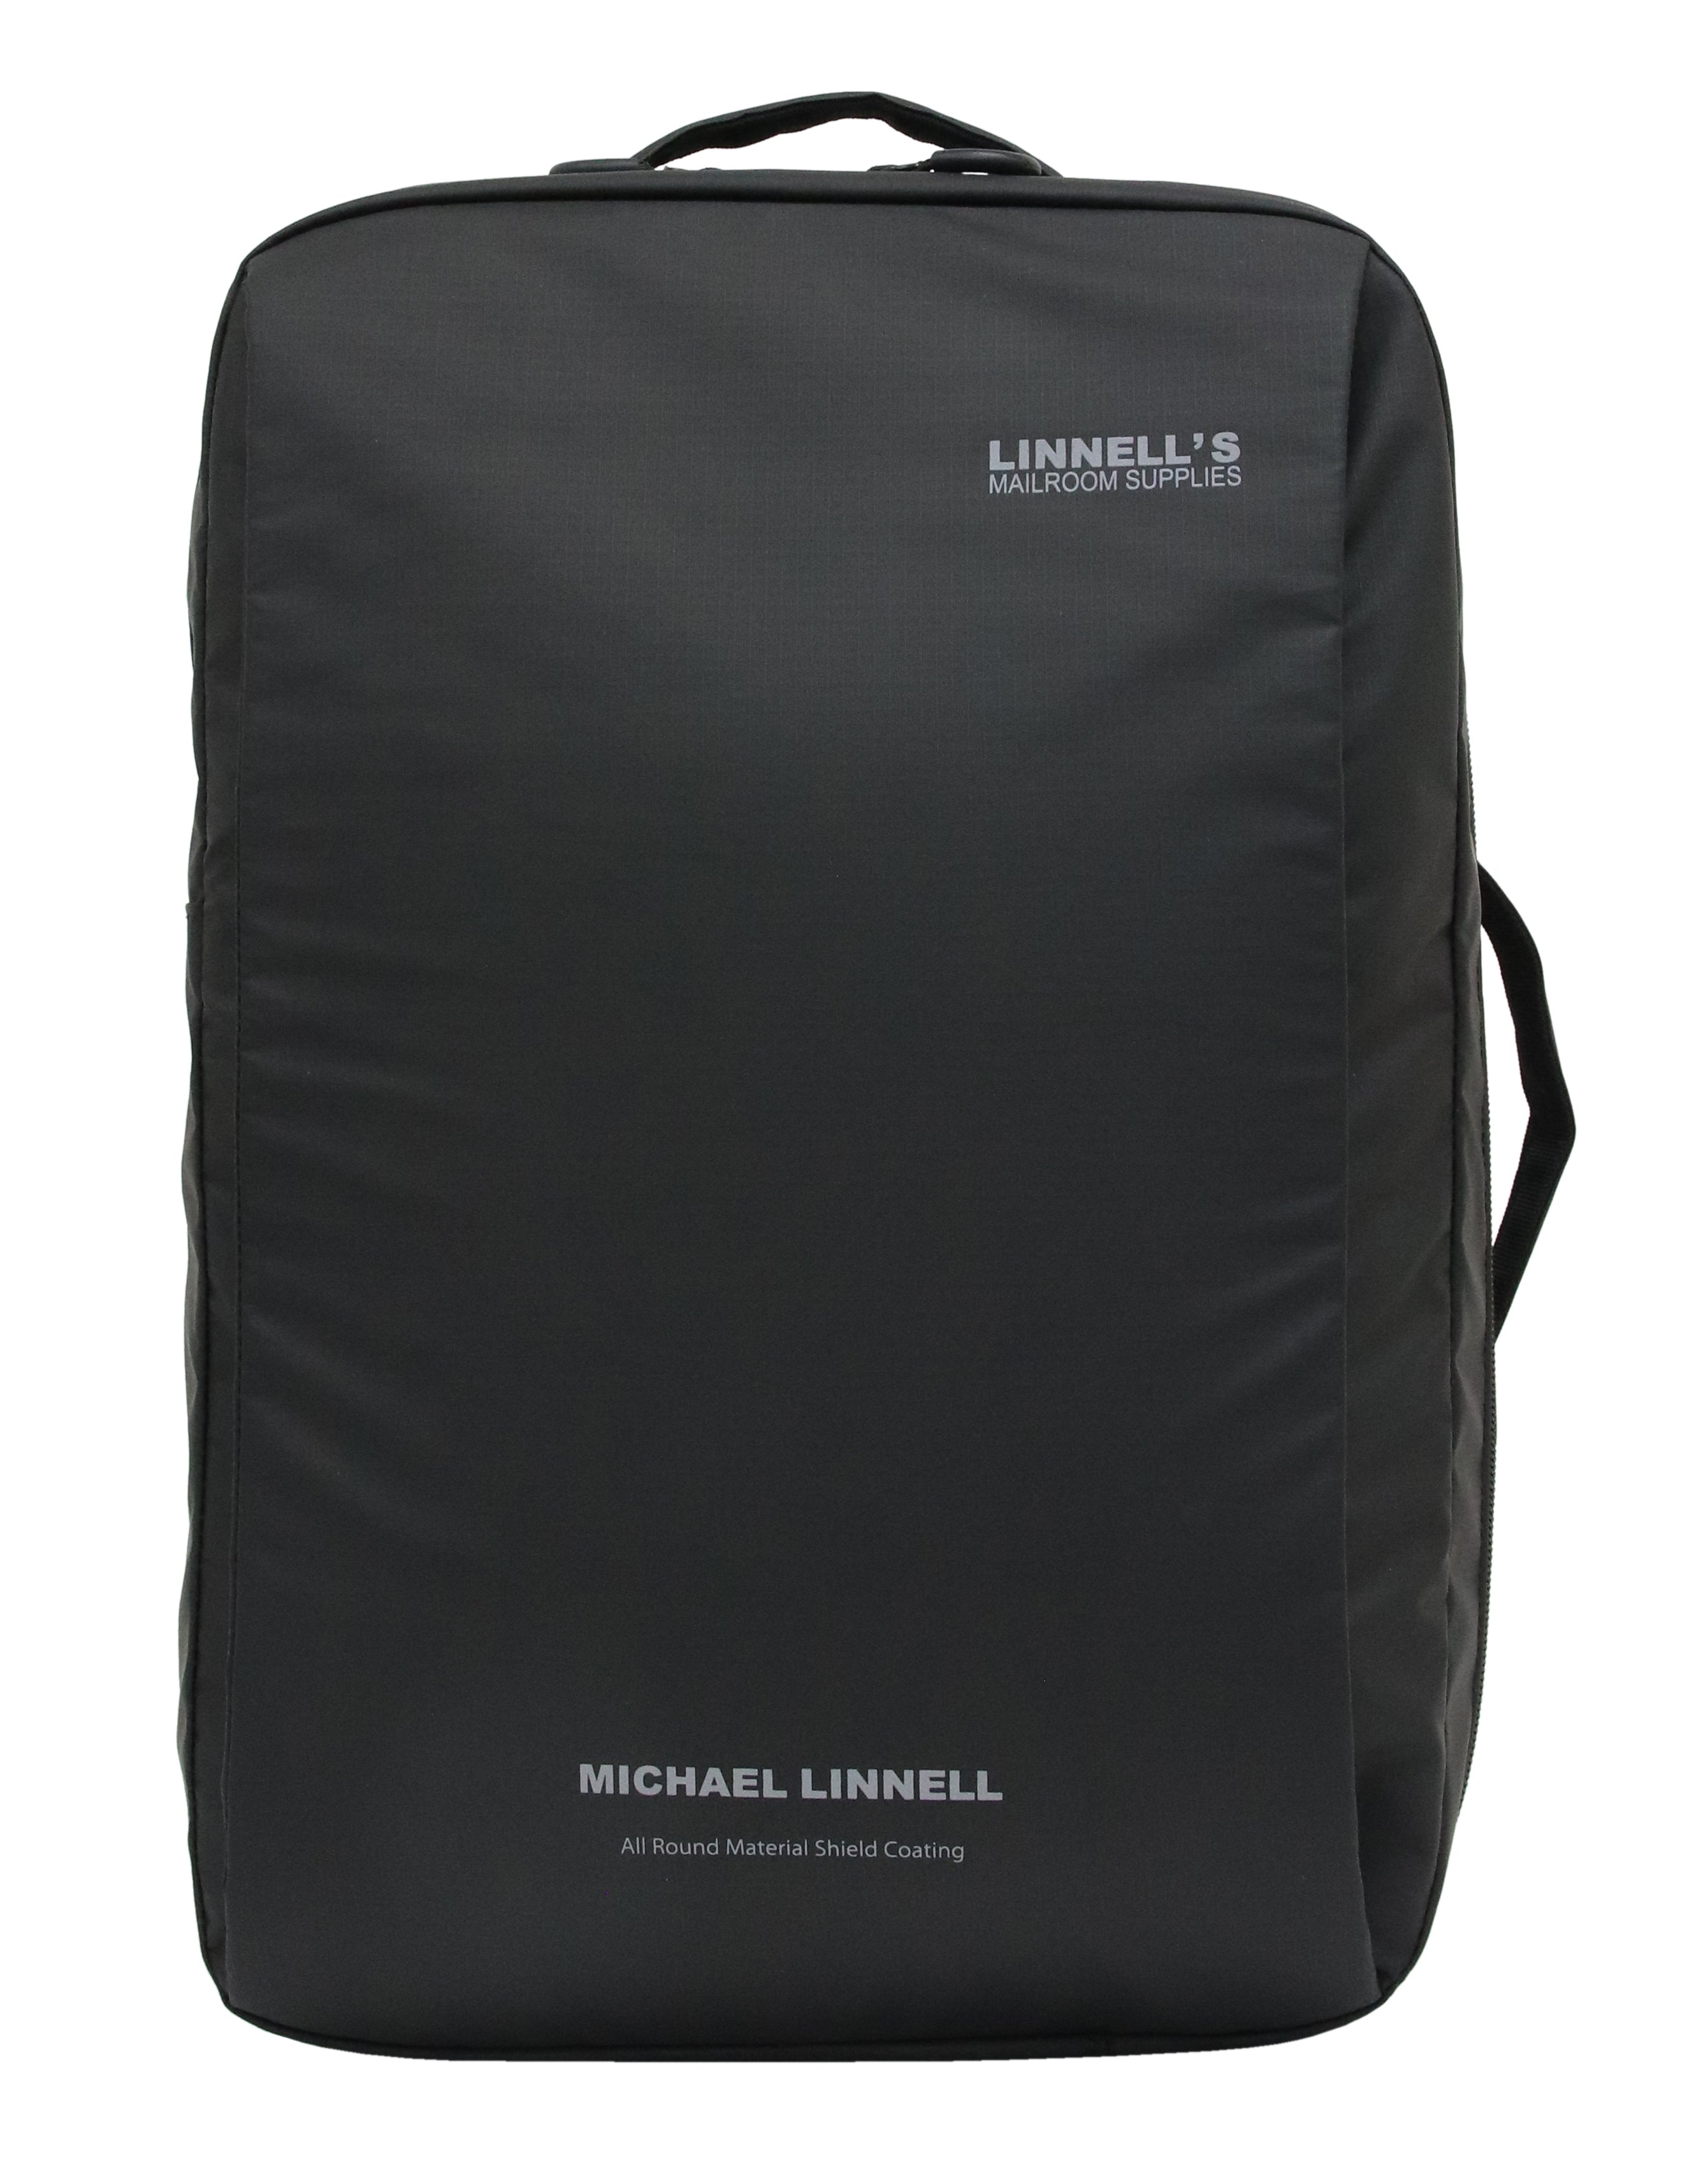 MLAC-22 Square Backpack – MICHAEL LINNELL | マイケルリンネル公式